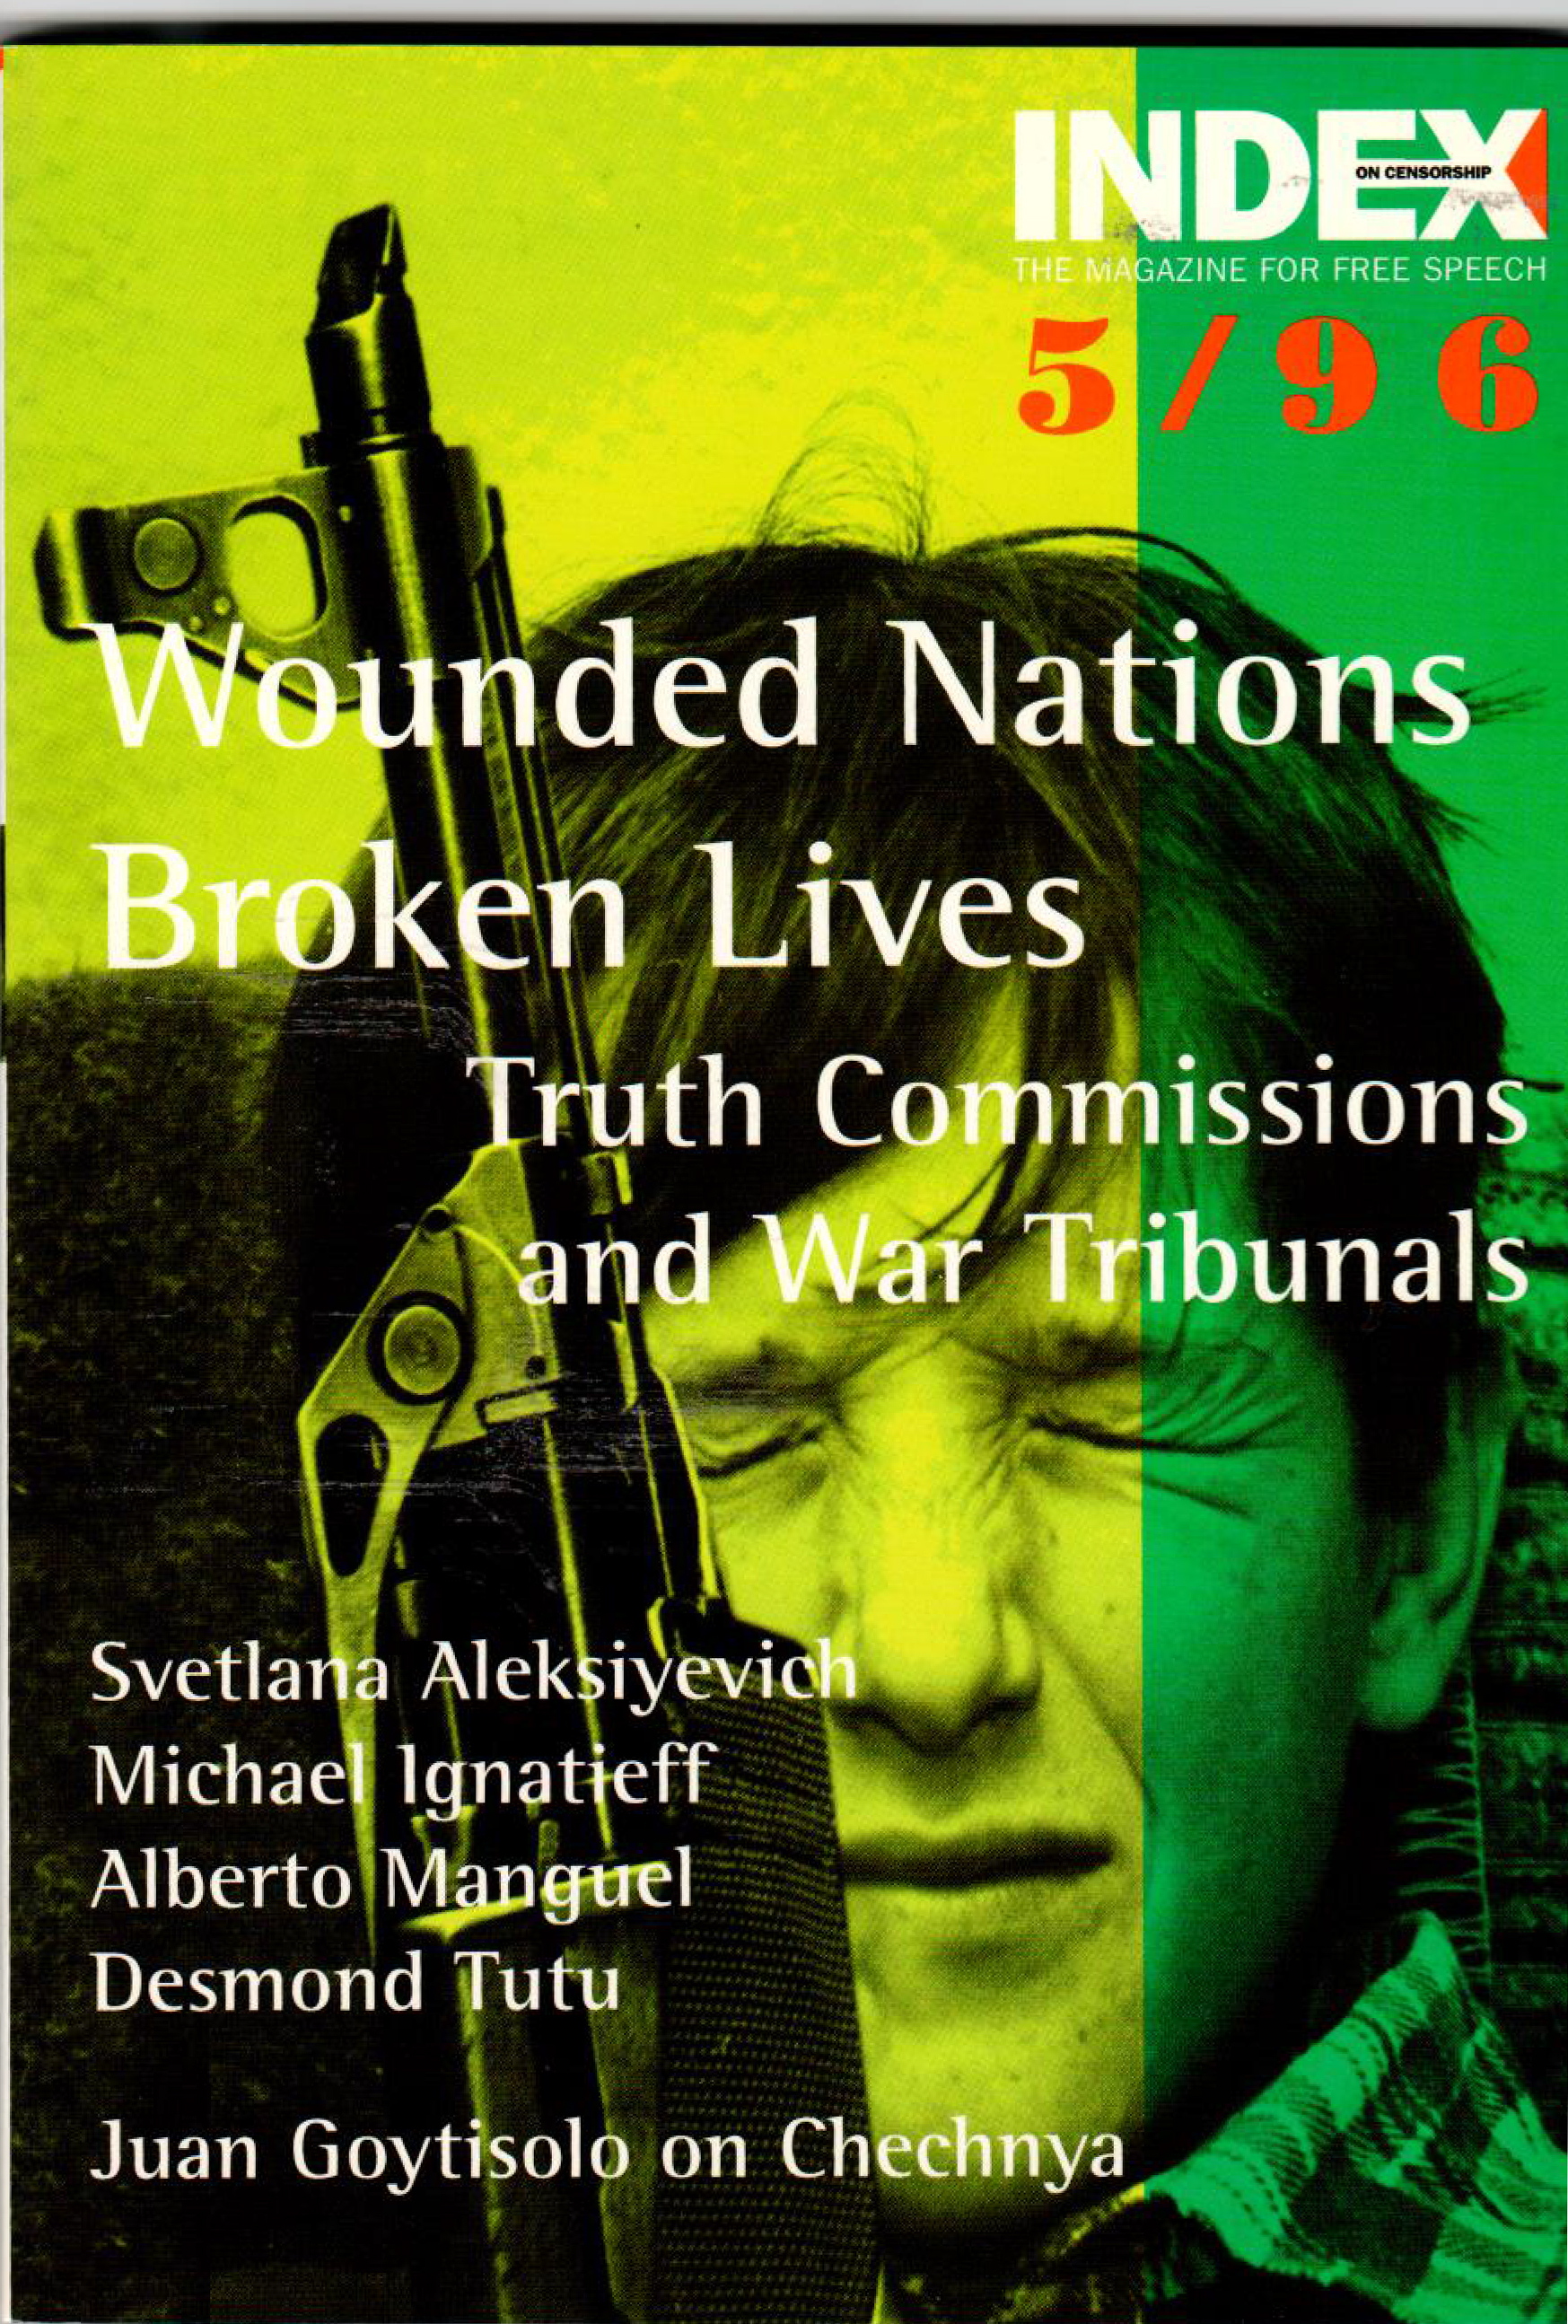 Wounded nations, broken lives